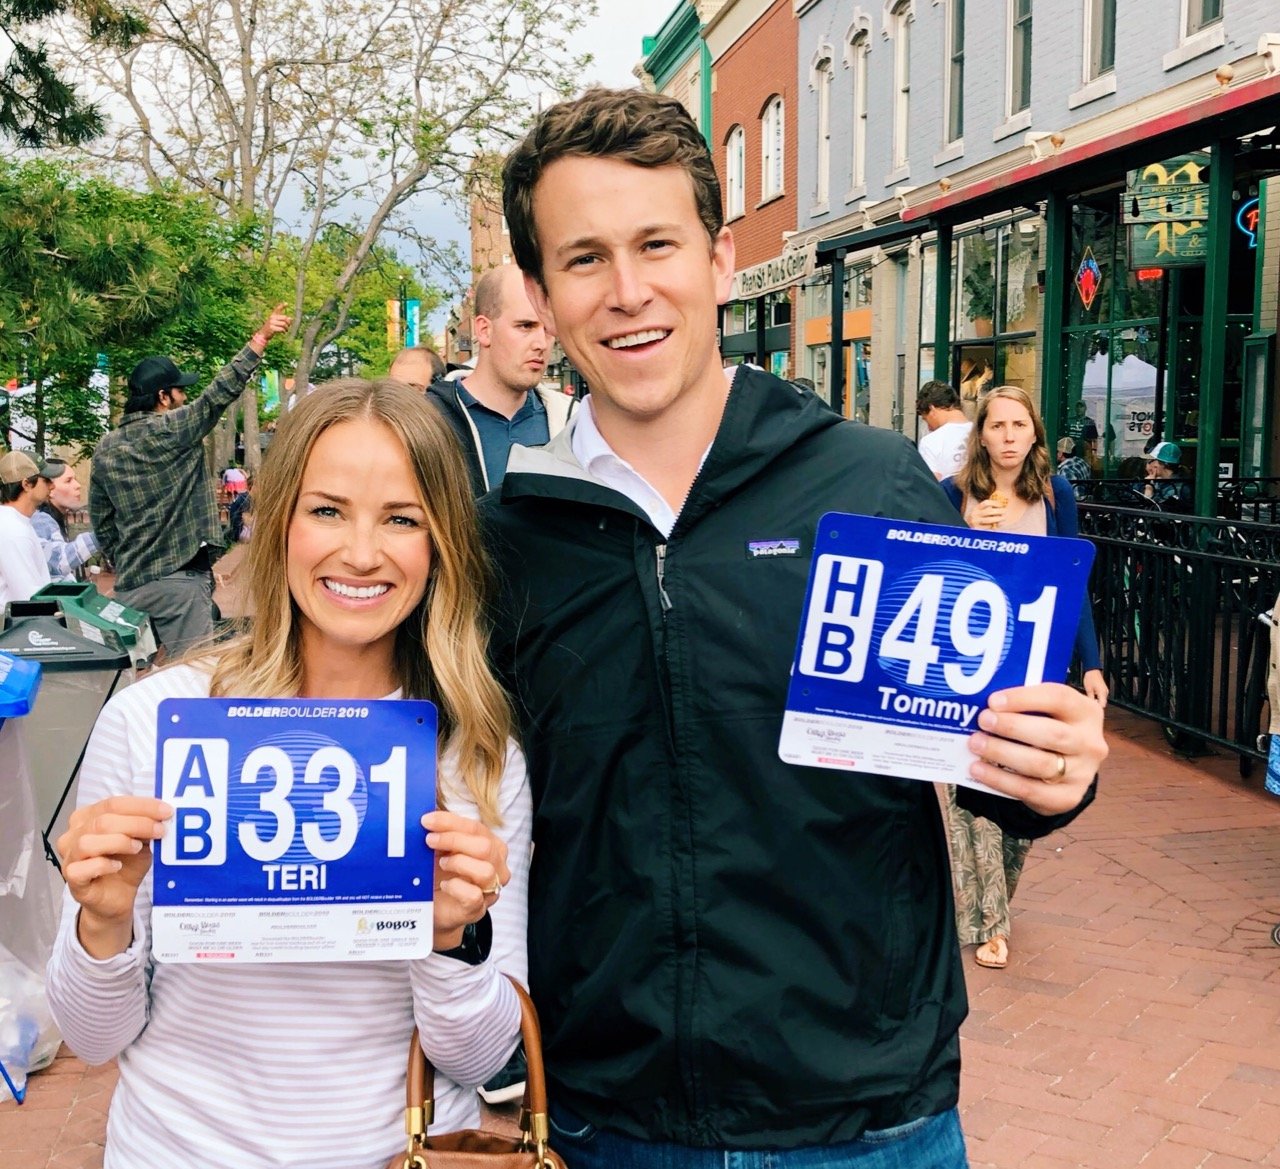 man and woman holding race bibs